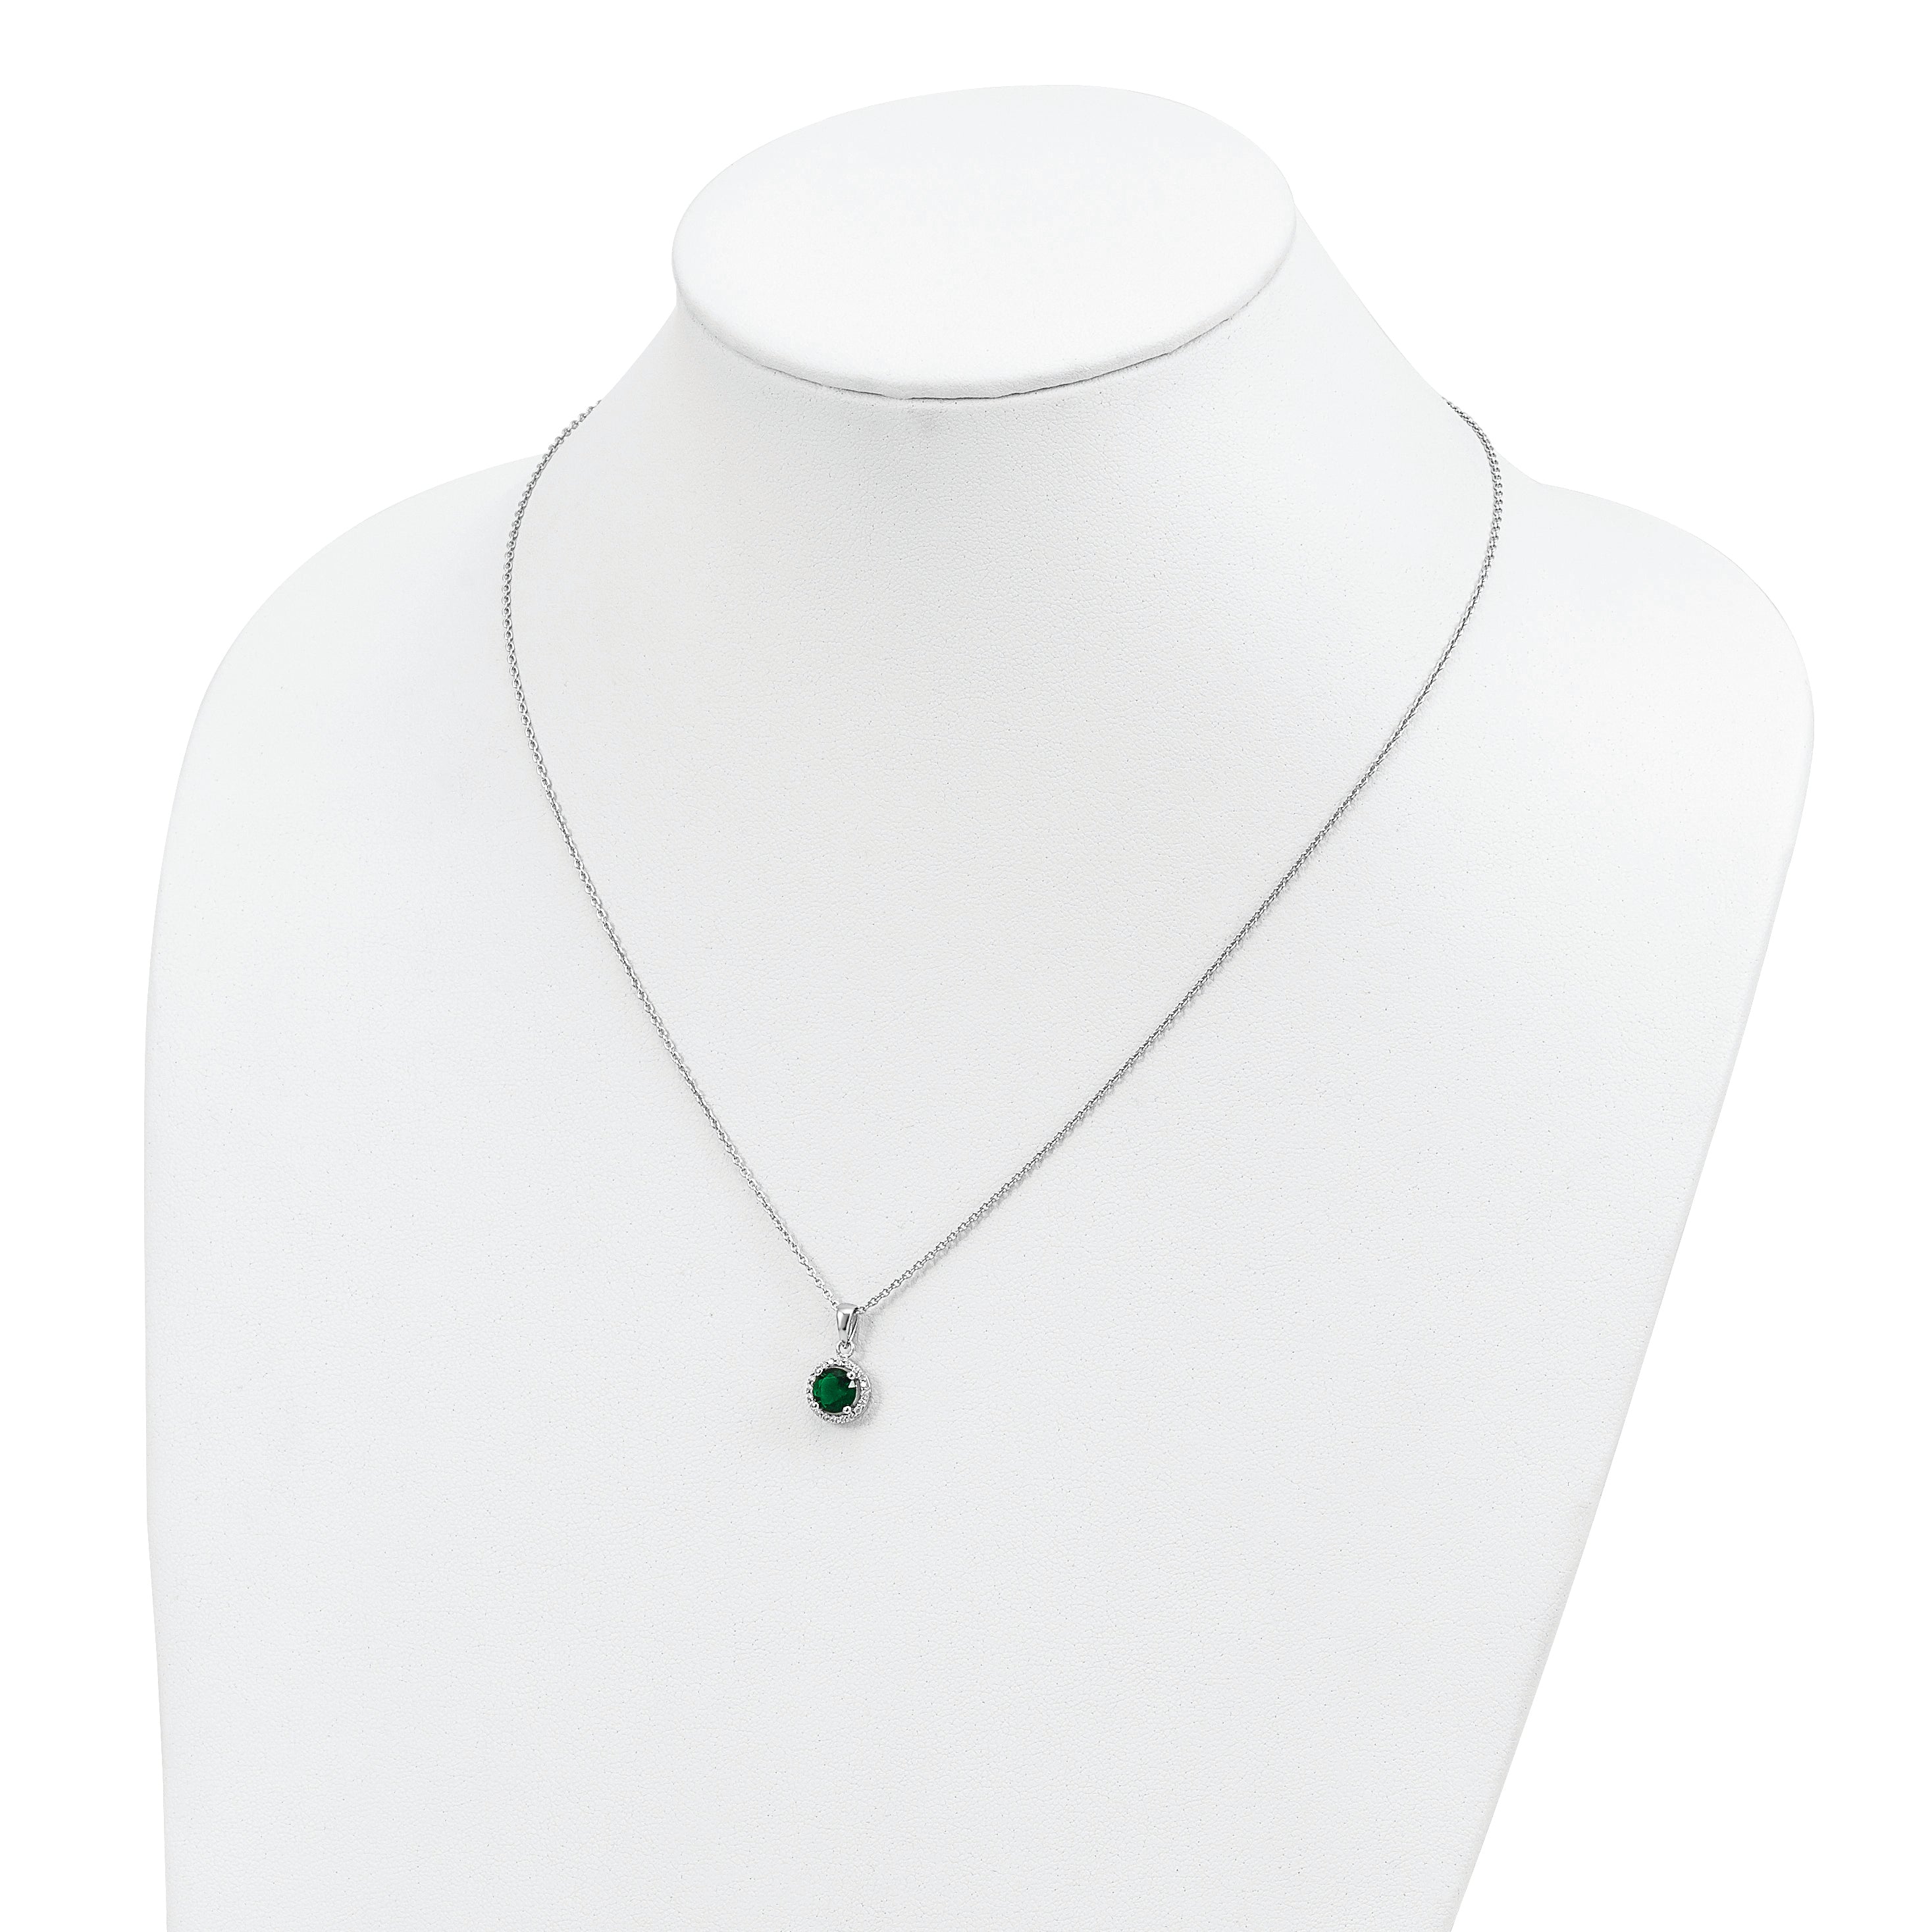 Brilliant Embers Sterling Silver Rhodium-plated 20 Stone 18 inch White and Green Micro Pav‚ CZ Necklace with 2 Inch Extender